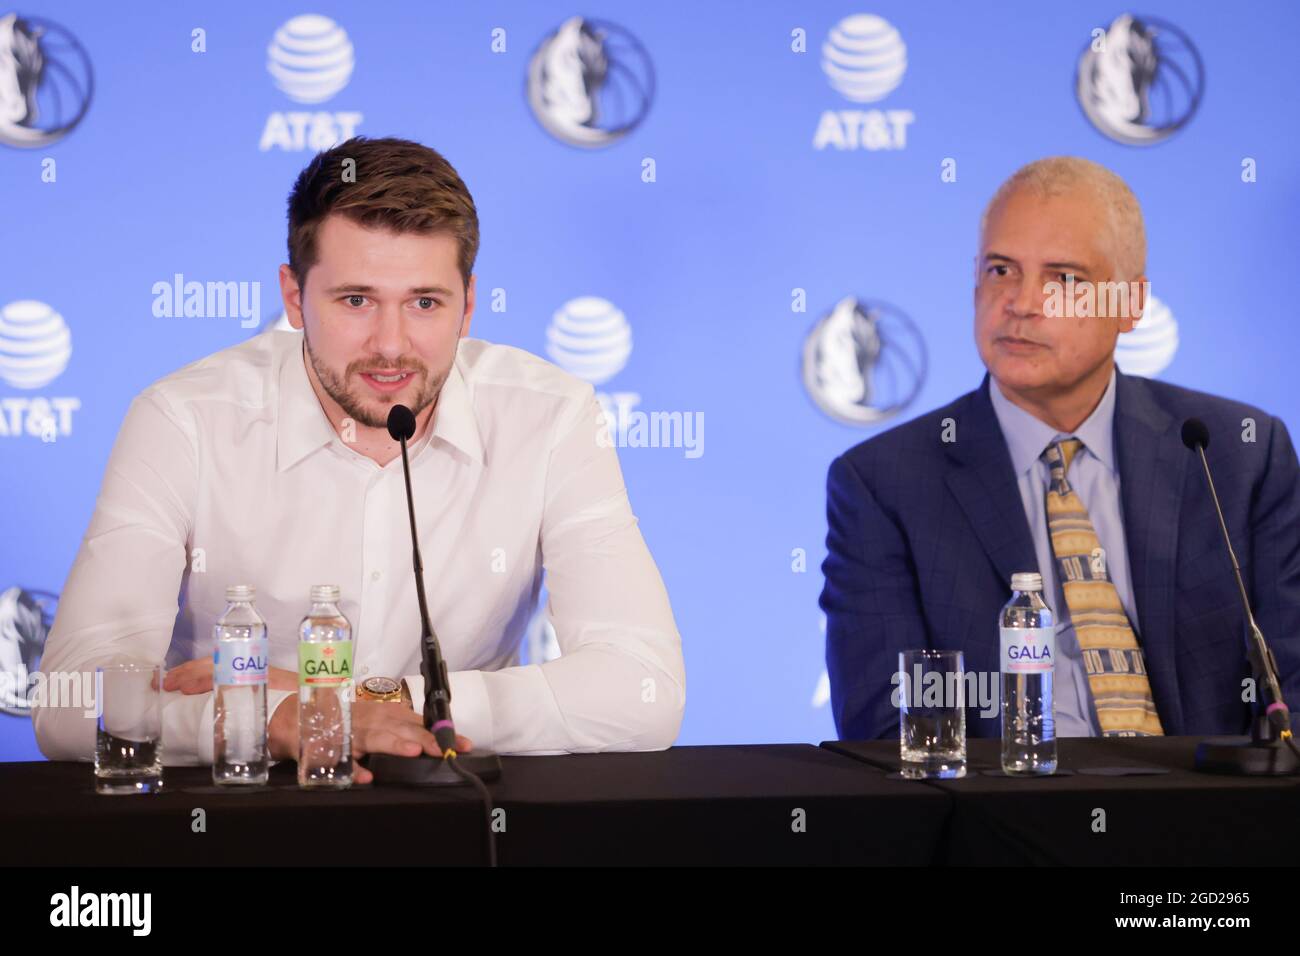 Ljubljana, Slovenia. 10th Aug, 2021. NBA star Luka Doncic and his agent at a press conference after signing a 5-year extension contract with Mavericks.Slovenian NBA star Luka Doncic signed a five-year 207-million-dollar contract extension with the Dallas Mavericks on Tuesday after Mavericks owner Mark Cuban, head coach Jason Kidd, general manager Nico Harrison and advisor Dirk Nowitzki arrived in Slovenia to formalize the deal. Credit: SOPA Images Limited/Alamy Live News Stock Photo